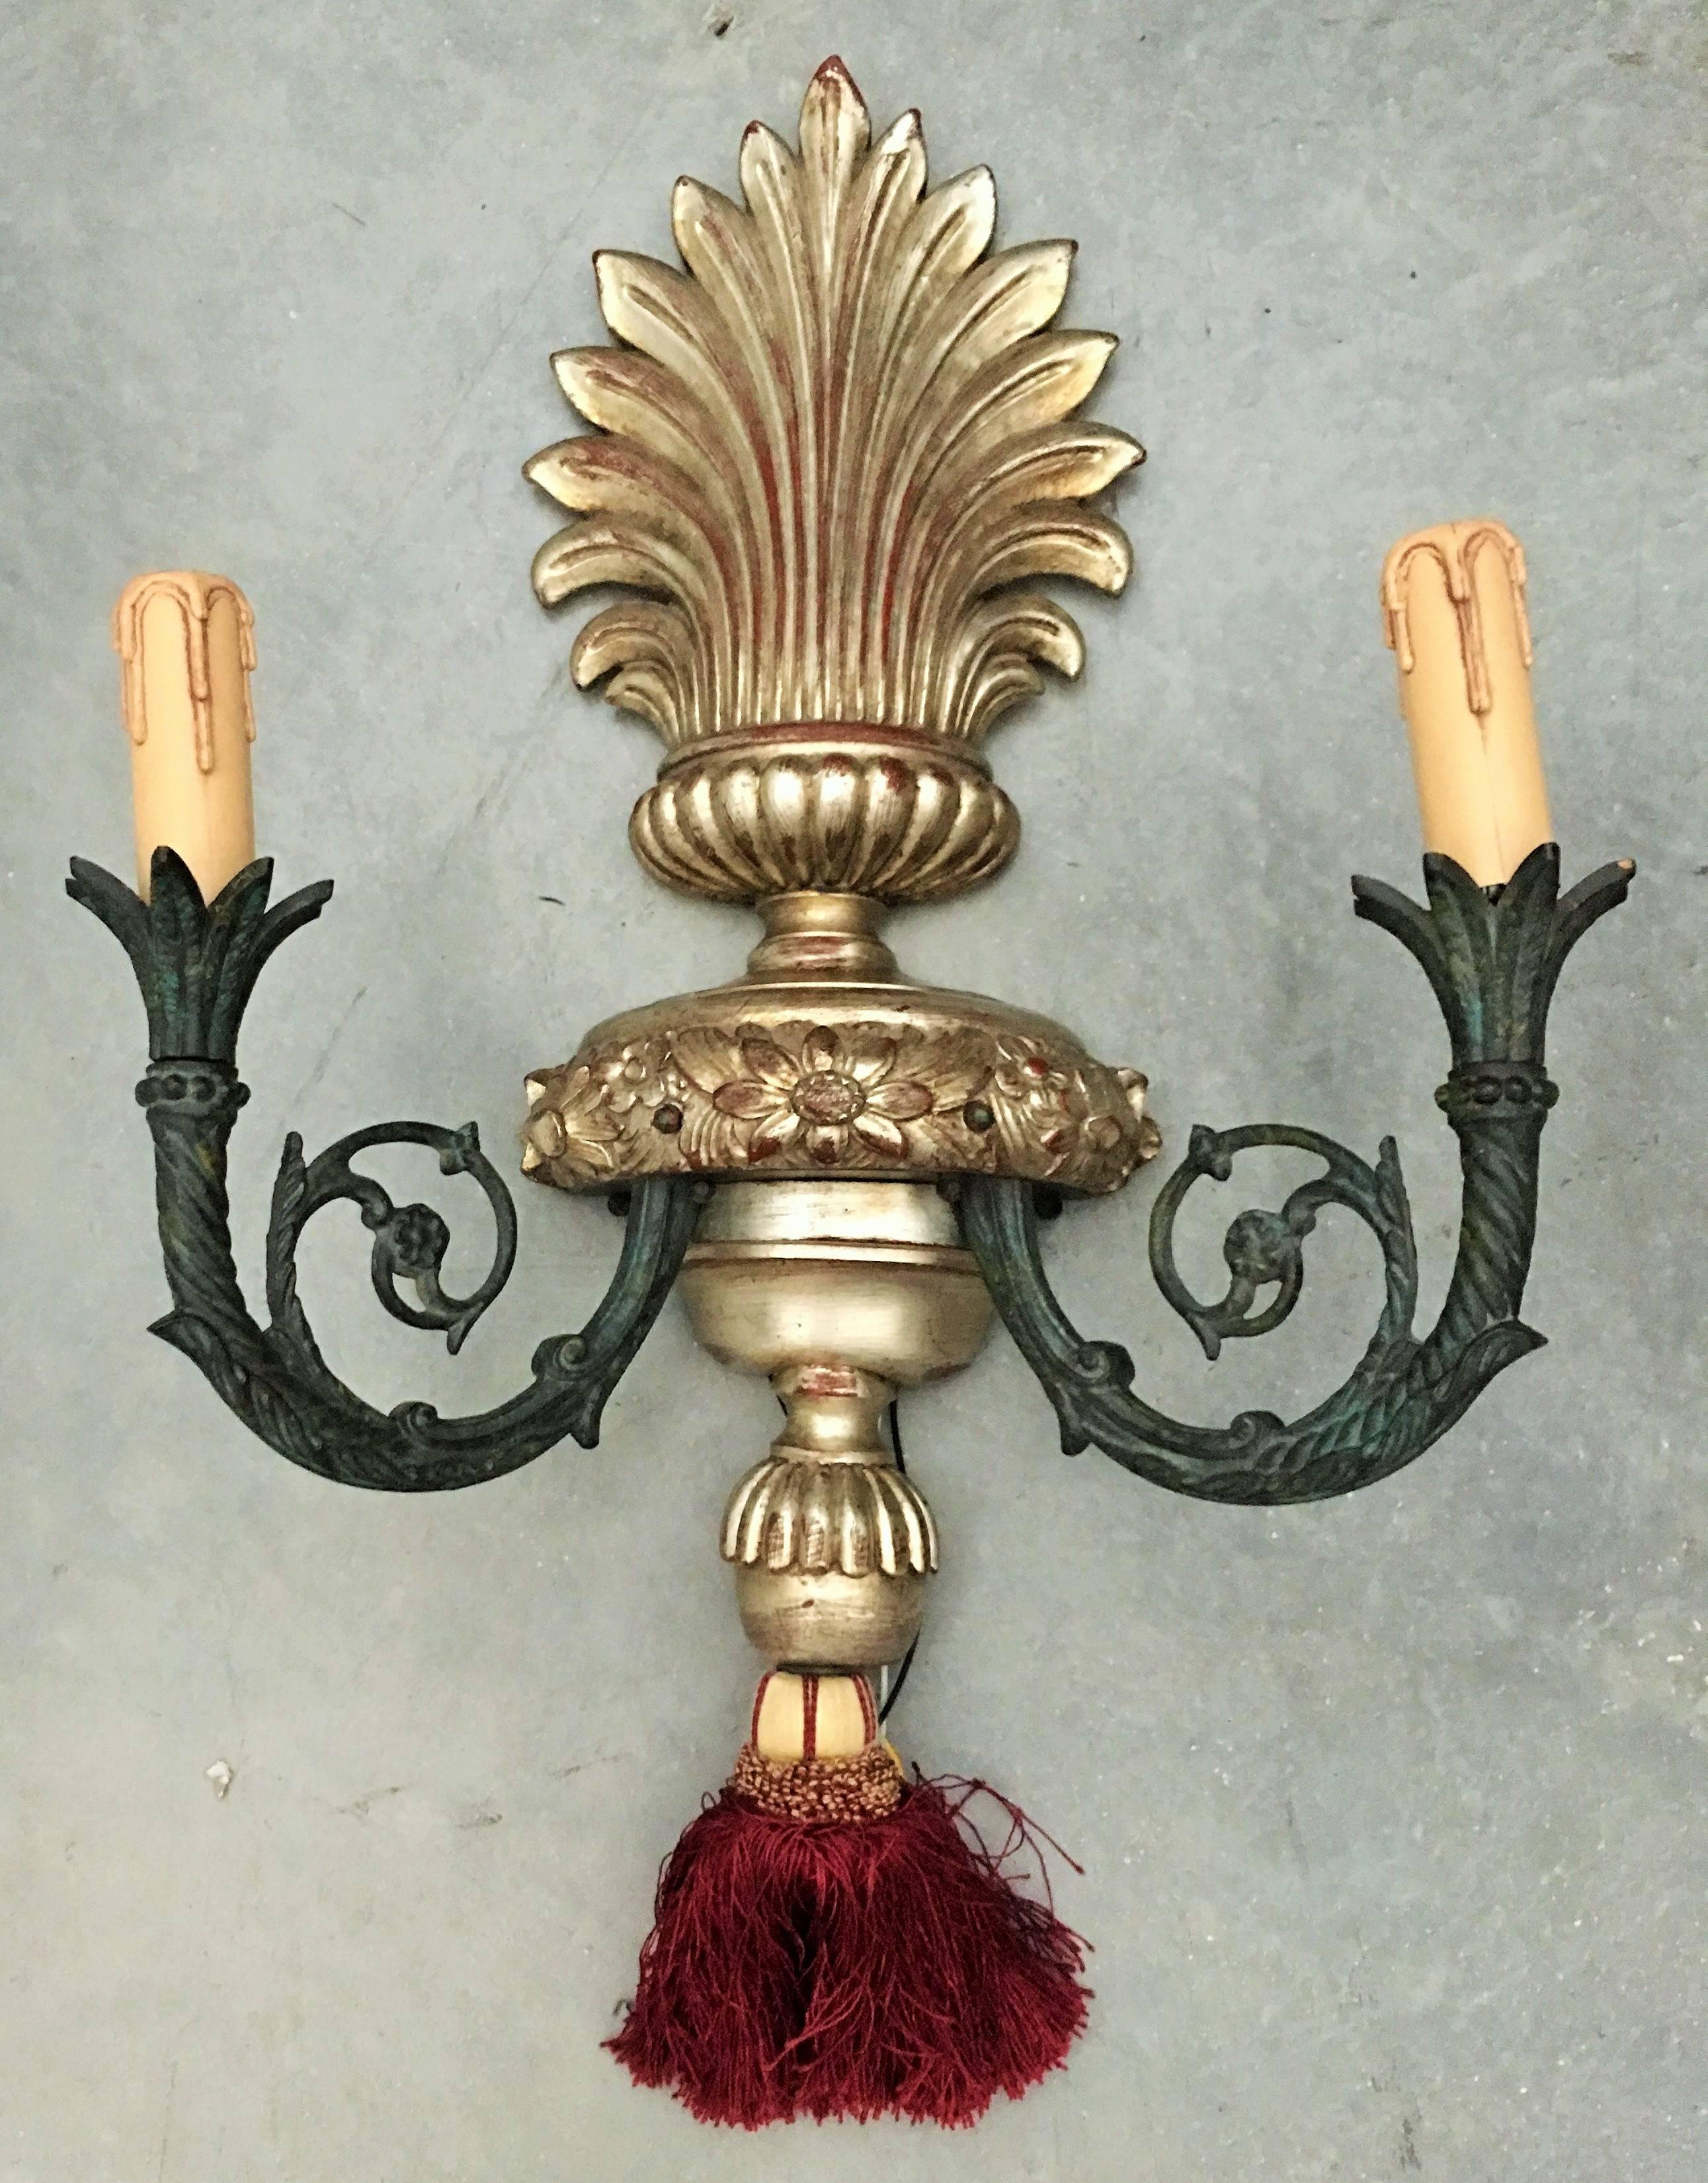 Pair of bronze two-lights Caldwell sconces with urn-shaped backplate. Original patina.
Beautiful and elegant pair of Italian wood and iron sconces.
You need rewired.